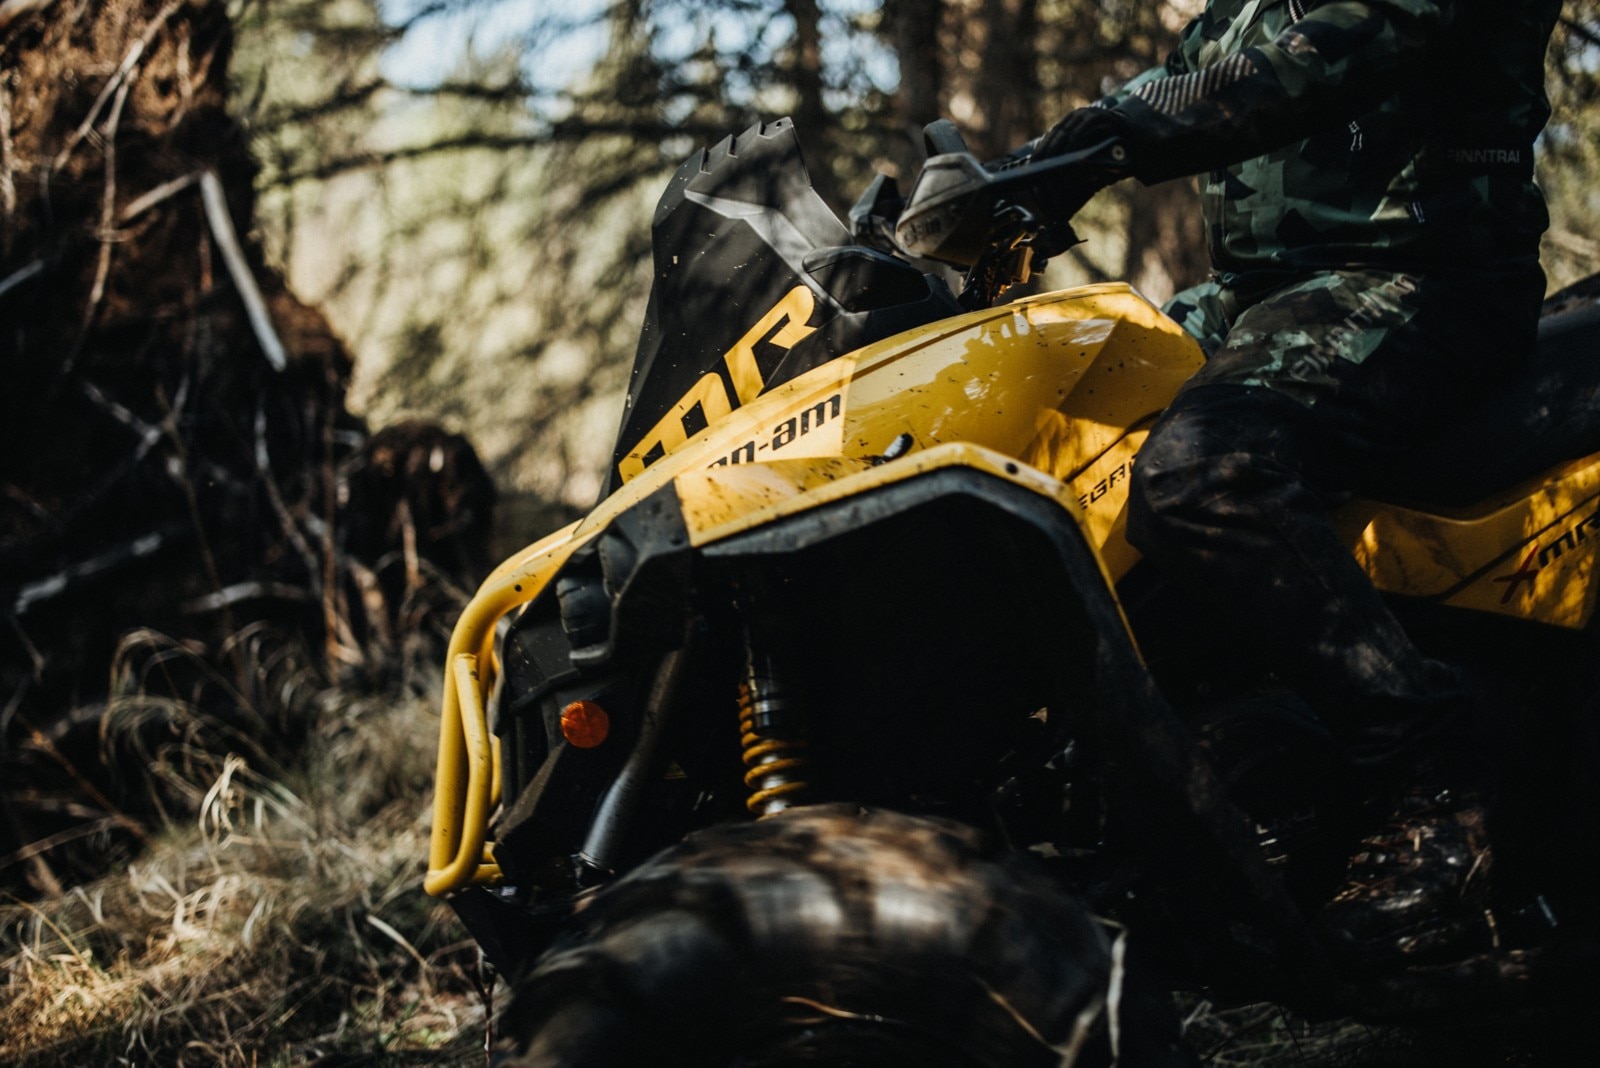 Body shot of rider on Can-Am vehicle